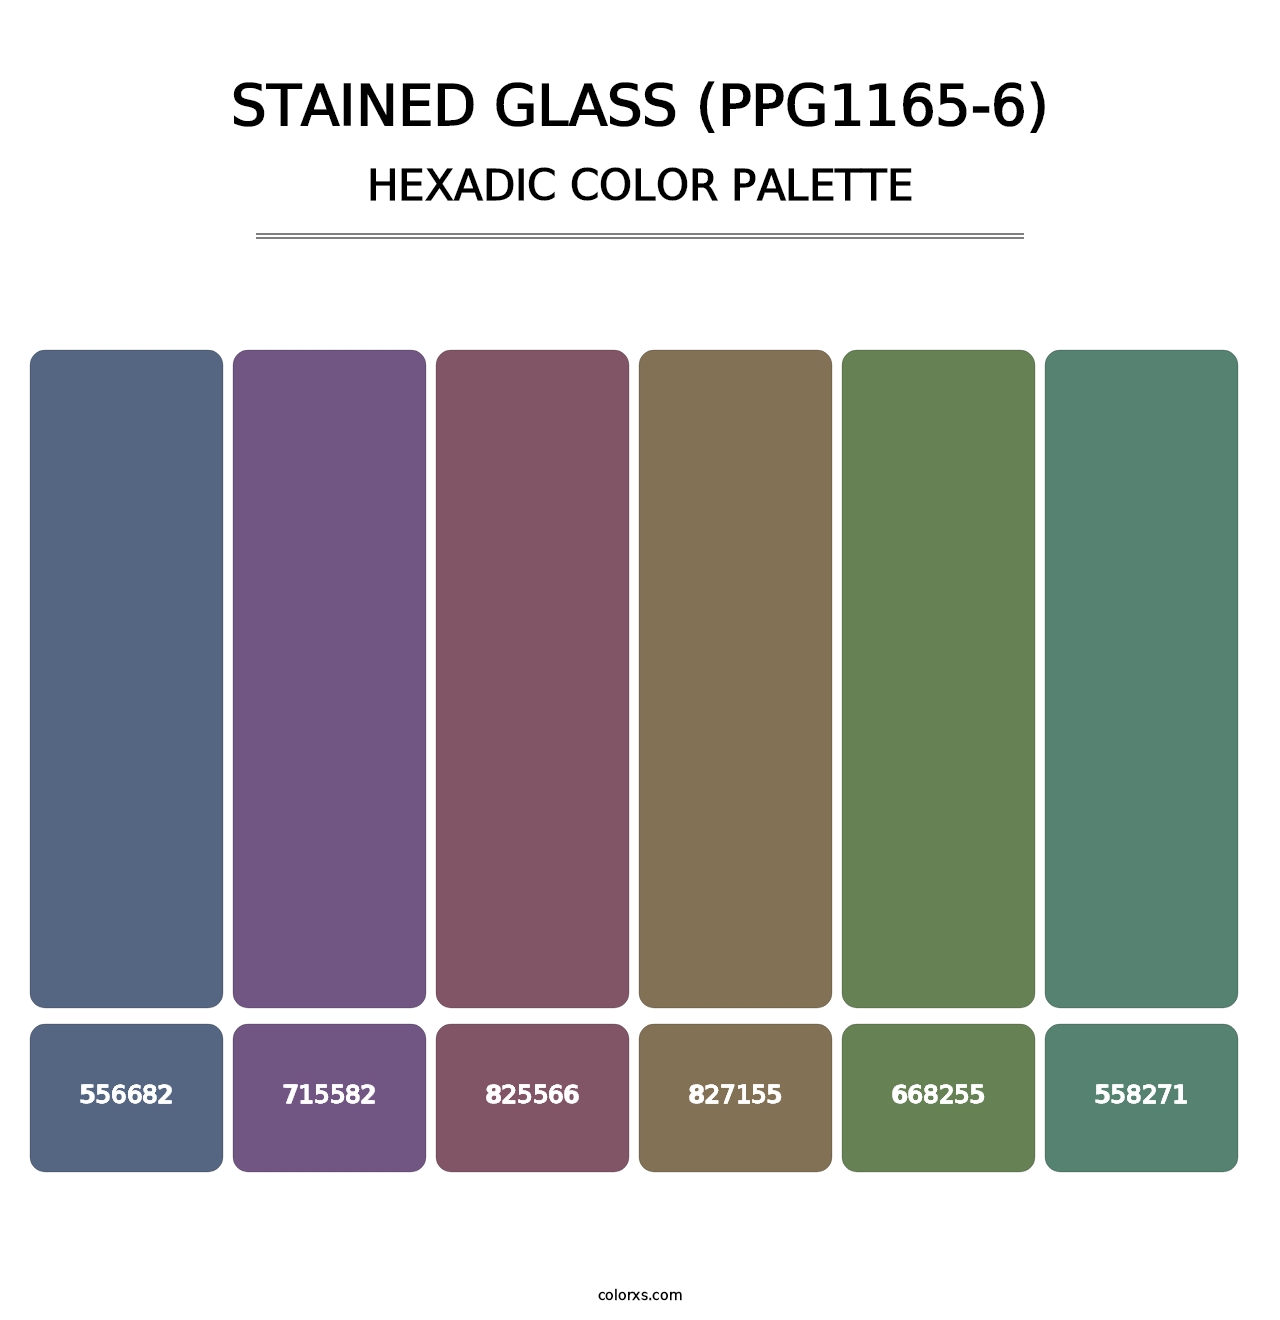 Stained Glass (PPG1165-6) - Hexadic Color Palette